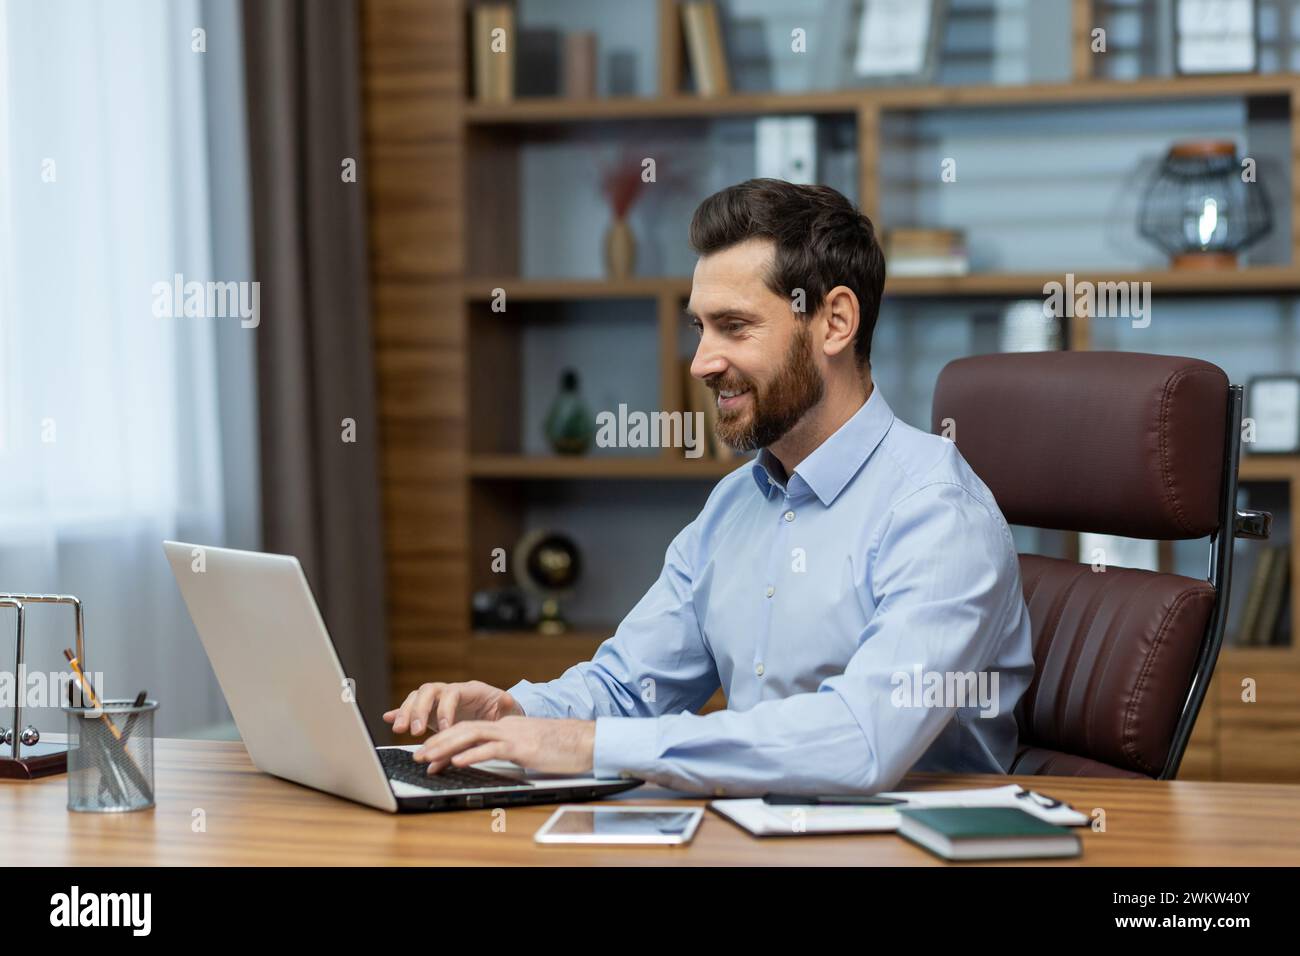 A smiling young man is working in the office, sitting at a laptop and typing on the keyboard. Stock Photo